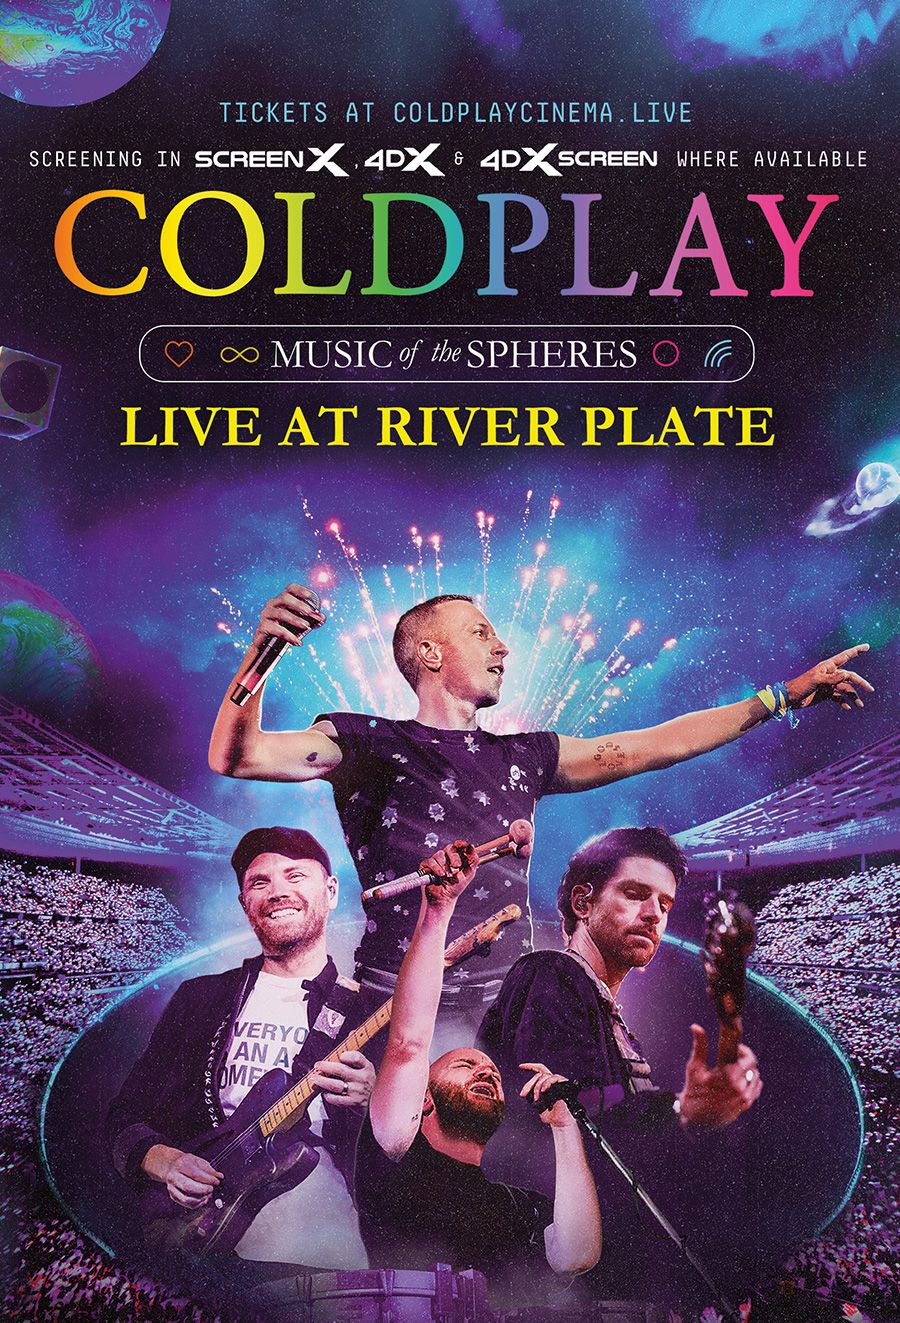 coldplay-music-of-the-spheres